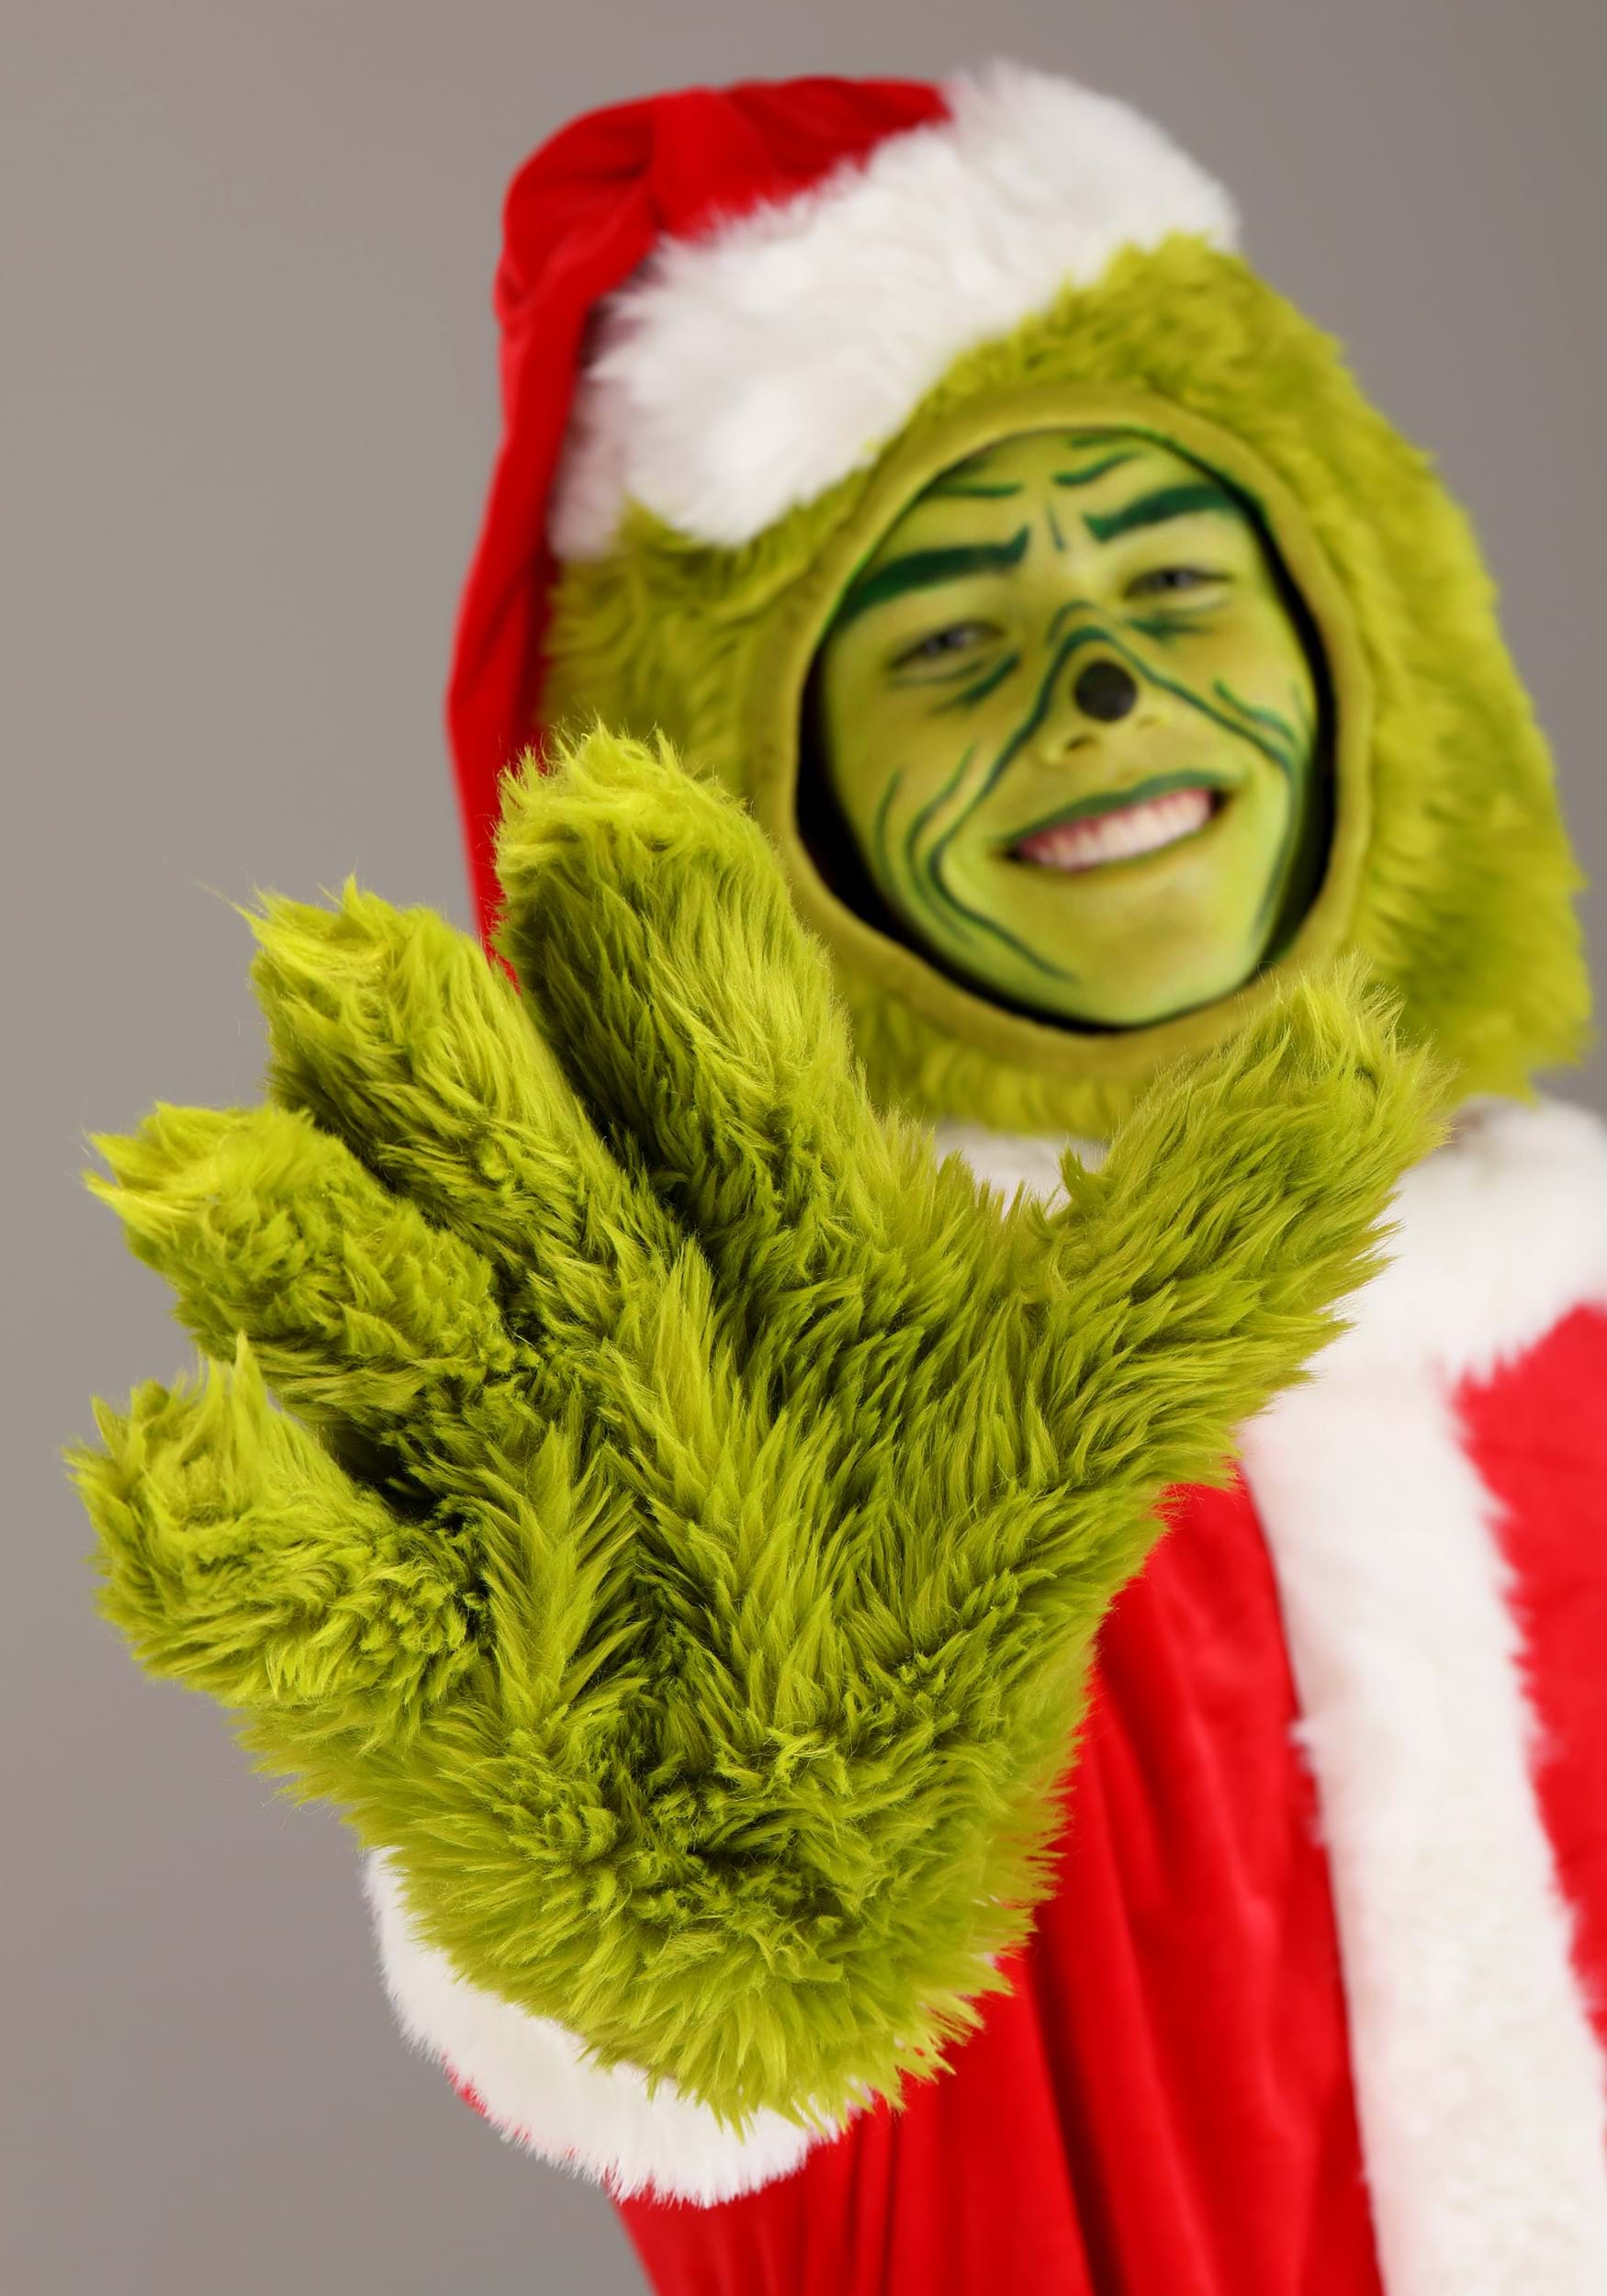 The Grinch Santa Open Face Adult Costume